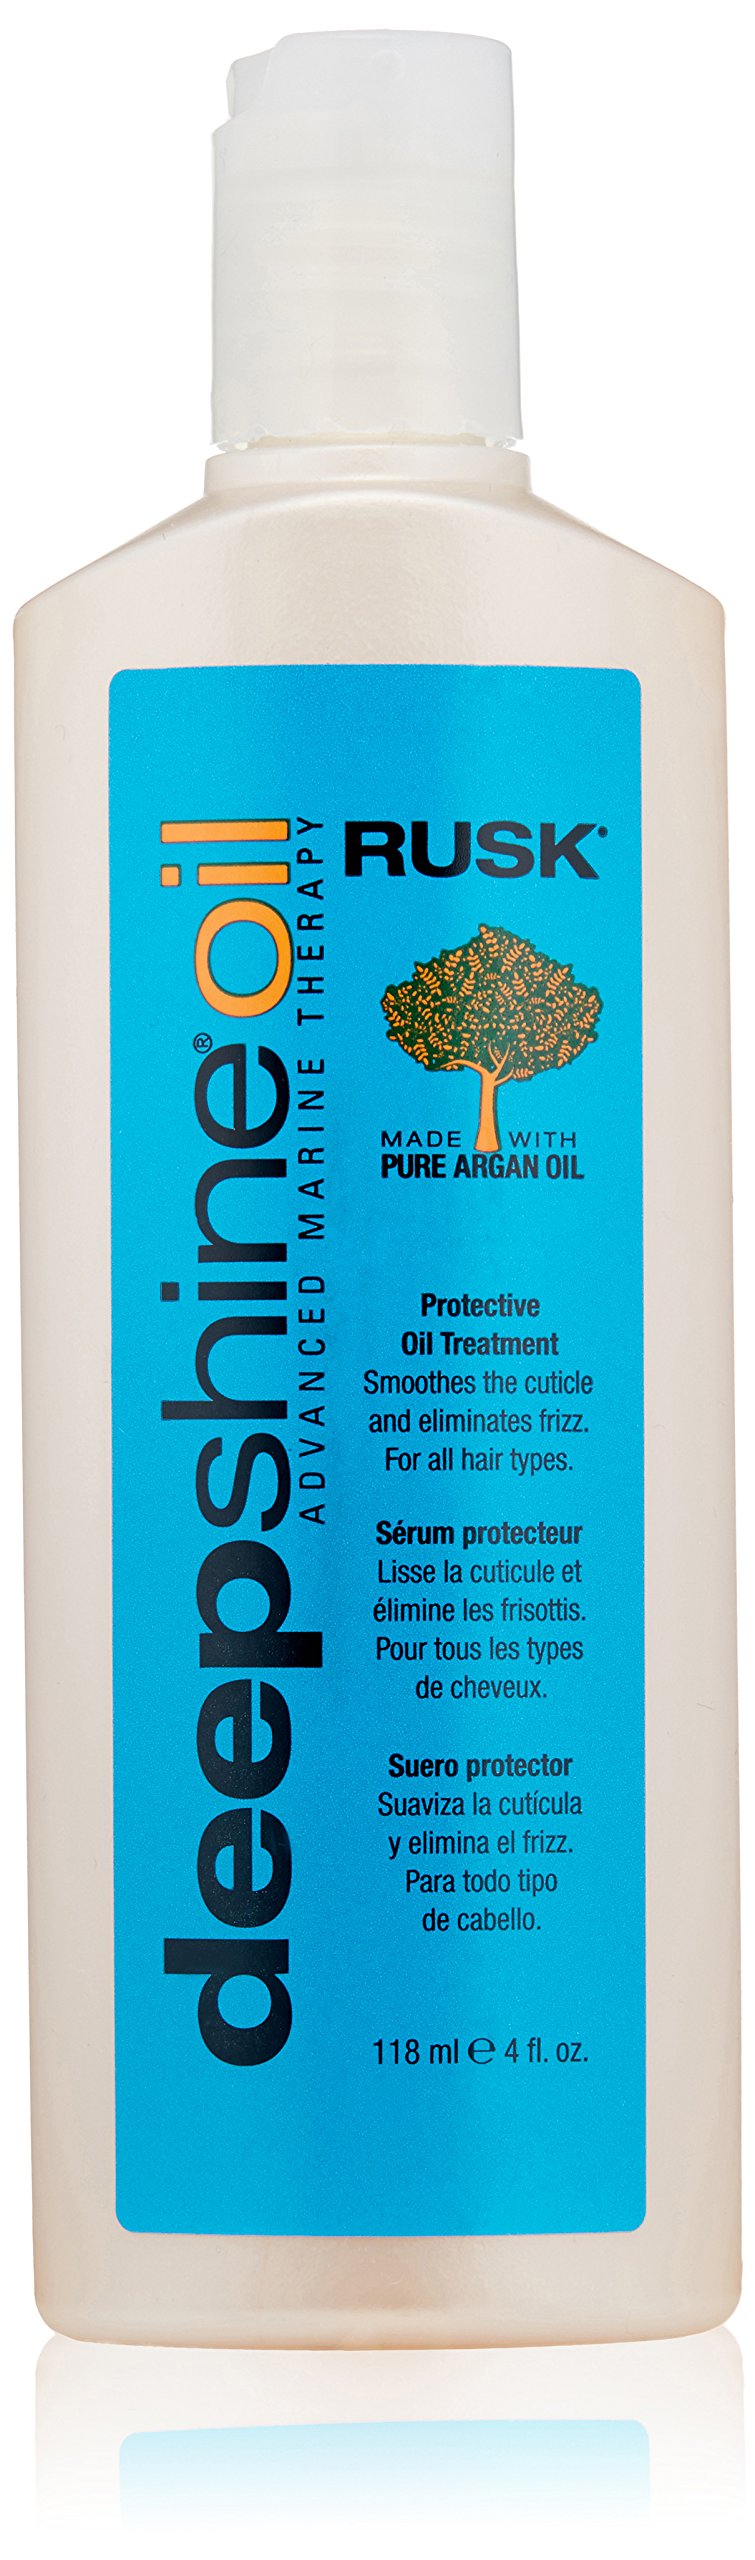 RUSK Deepshine Oil Protective Oil Treatment, Marine Mineral-Enriched Argan Oil Treatment Eliminates Frizz, Improves Elasticity, and Leaves Hair Soft, Silky, and Manageable, 4 Fl Oz (Pack of 1)